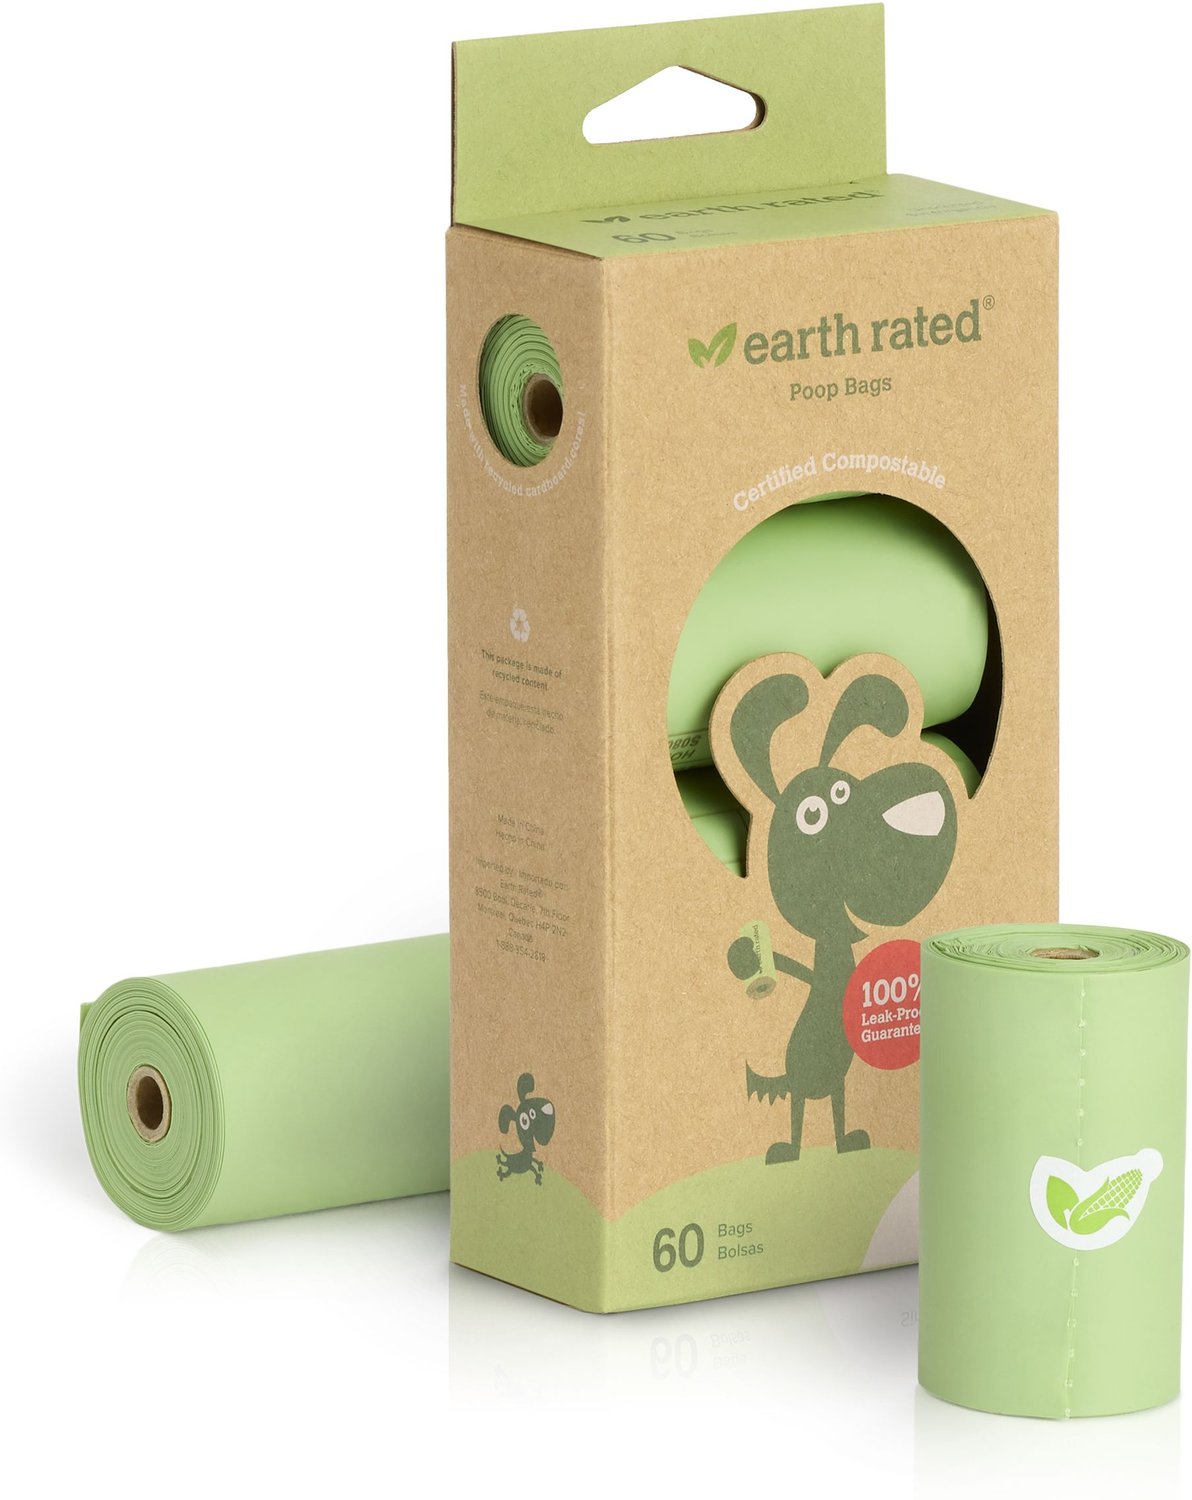 Earth Rated Earth Rated Dog Poo Bags Puppy Poop Waste Lavender Scented Refill Roll Dispenser 